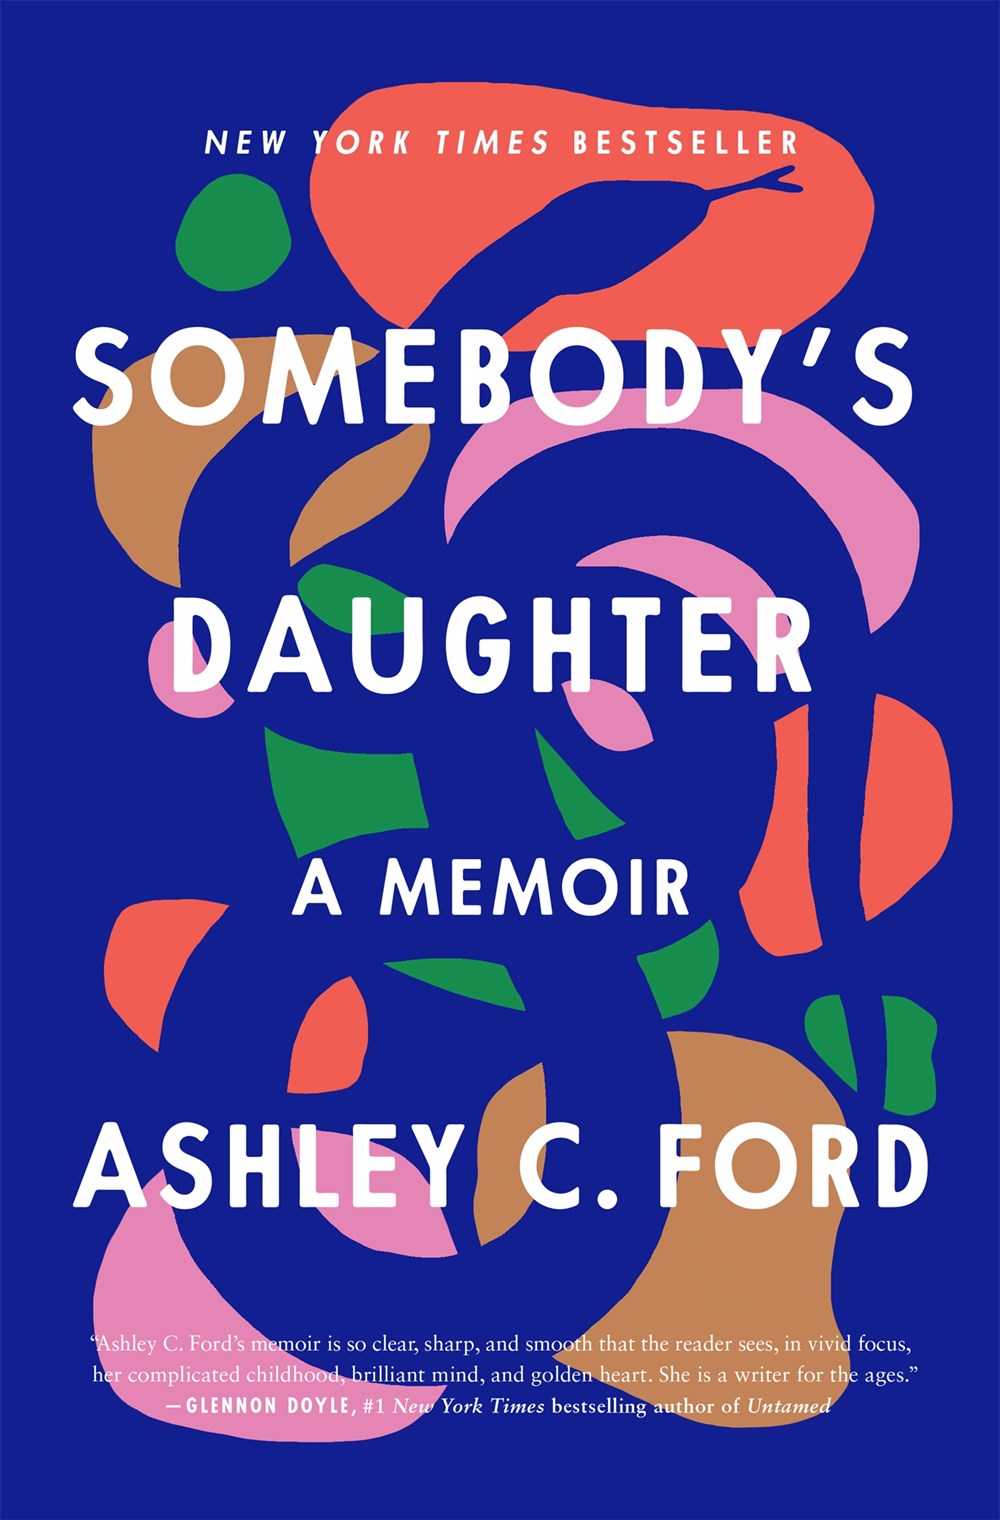 Image for "Somebody's Daughter"